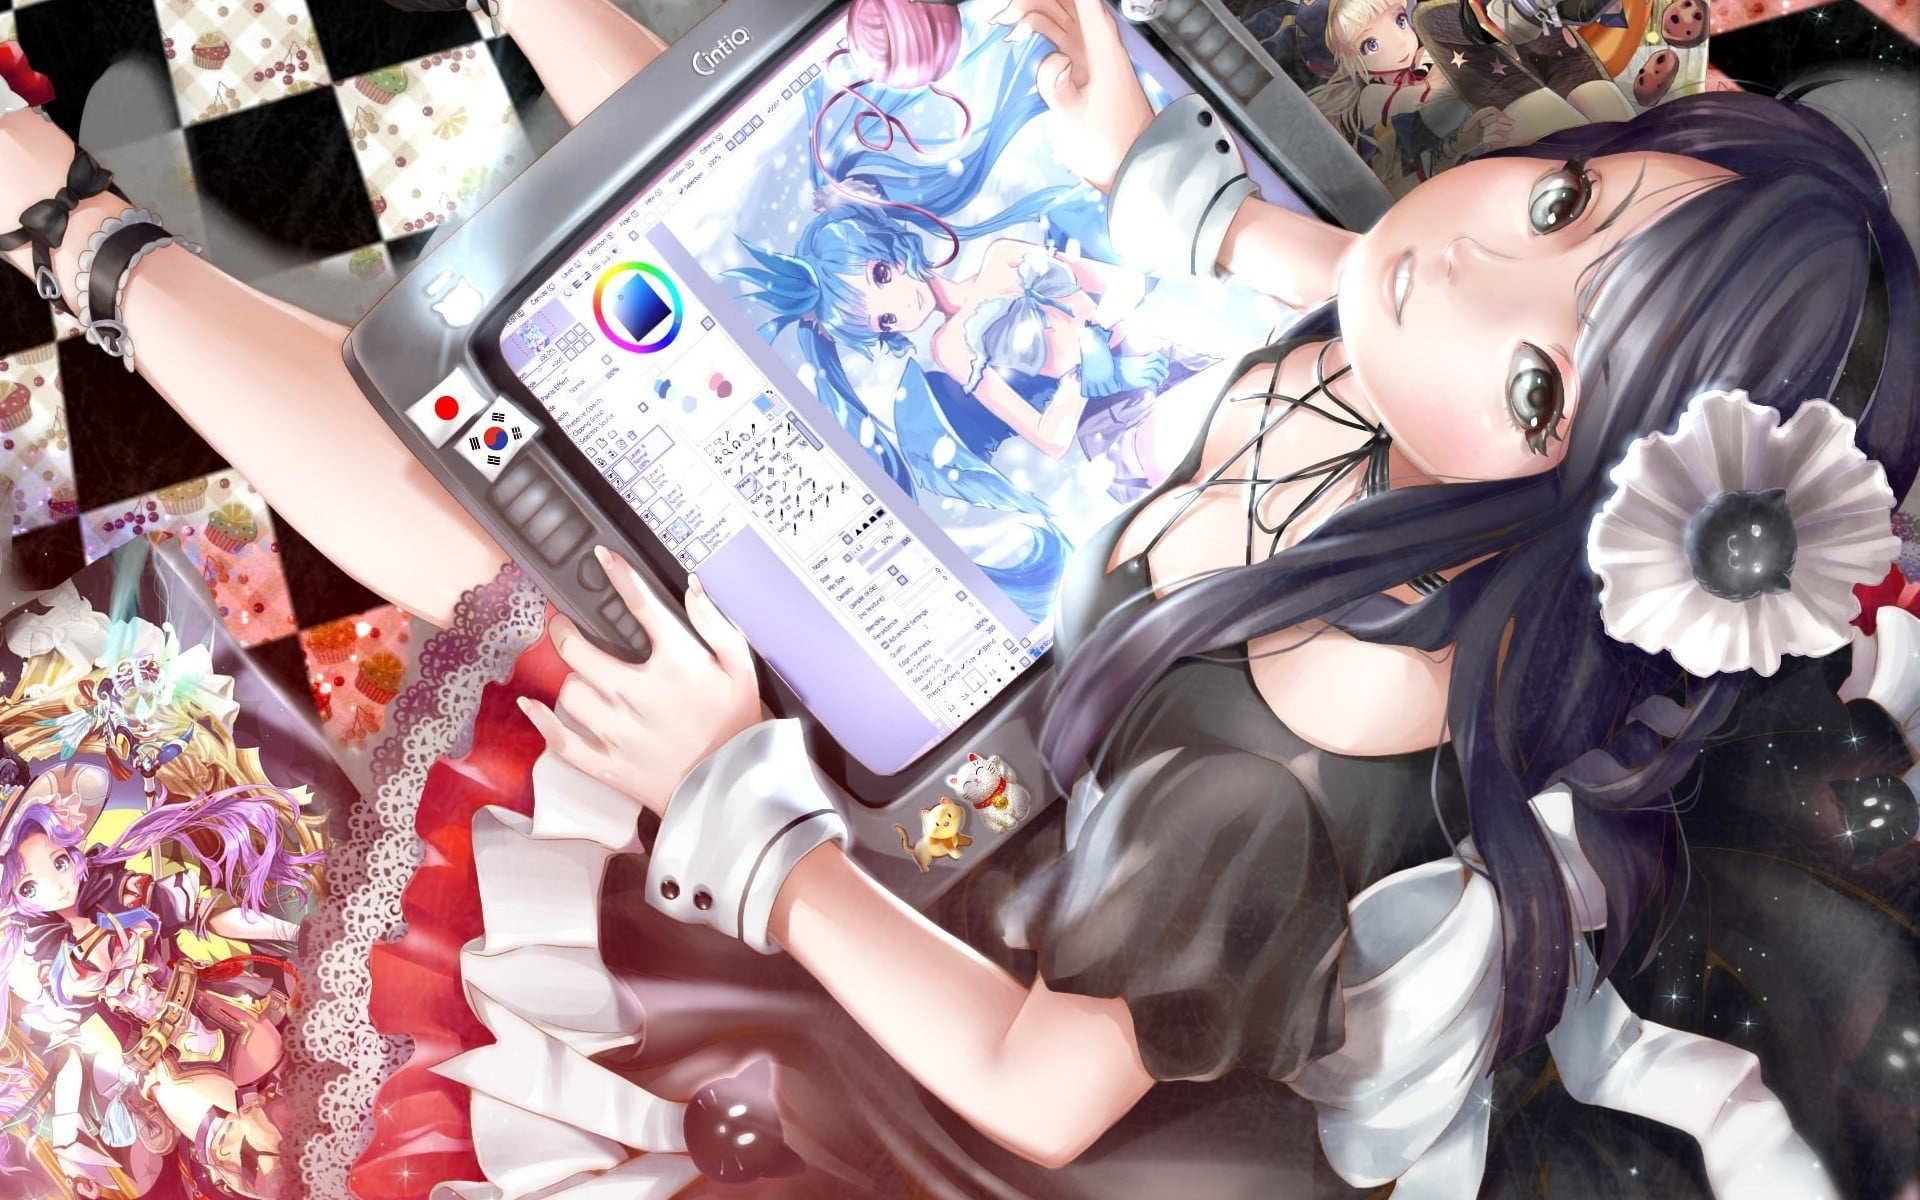 black haired anime character holding gray tablet computer, anime girls